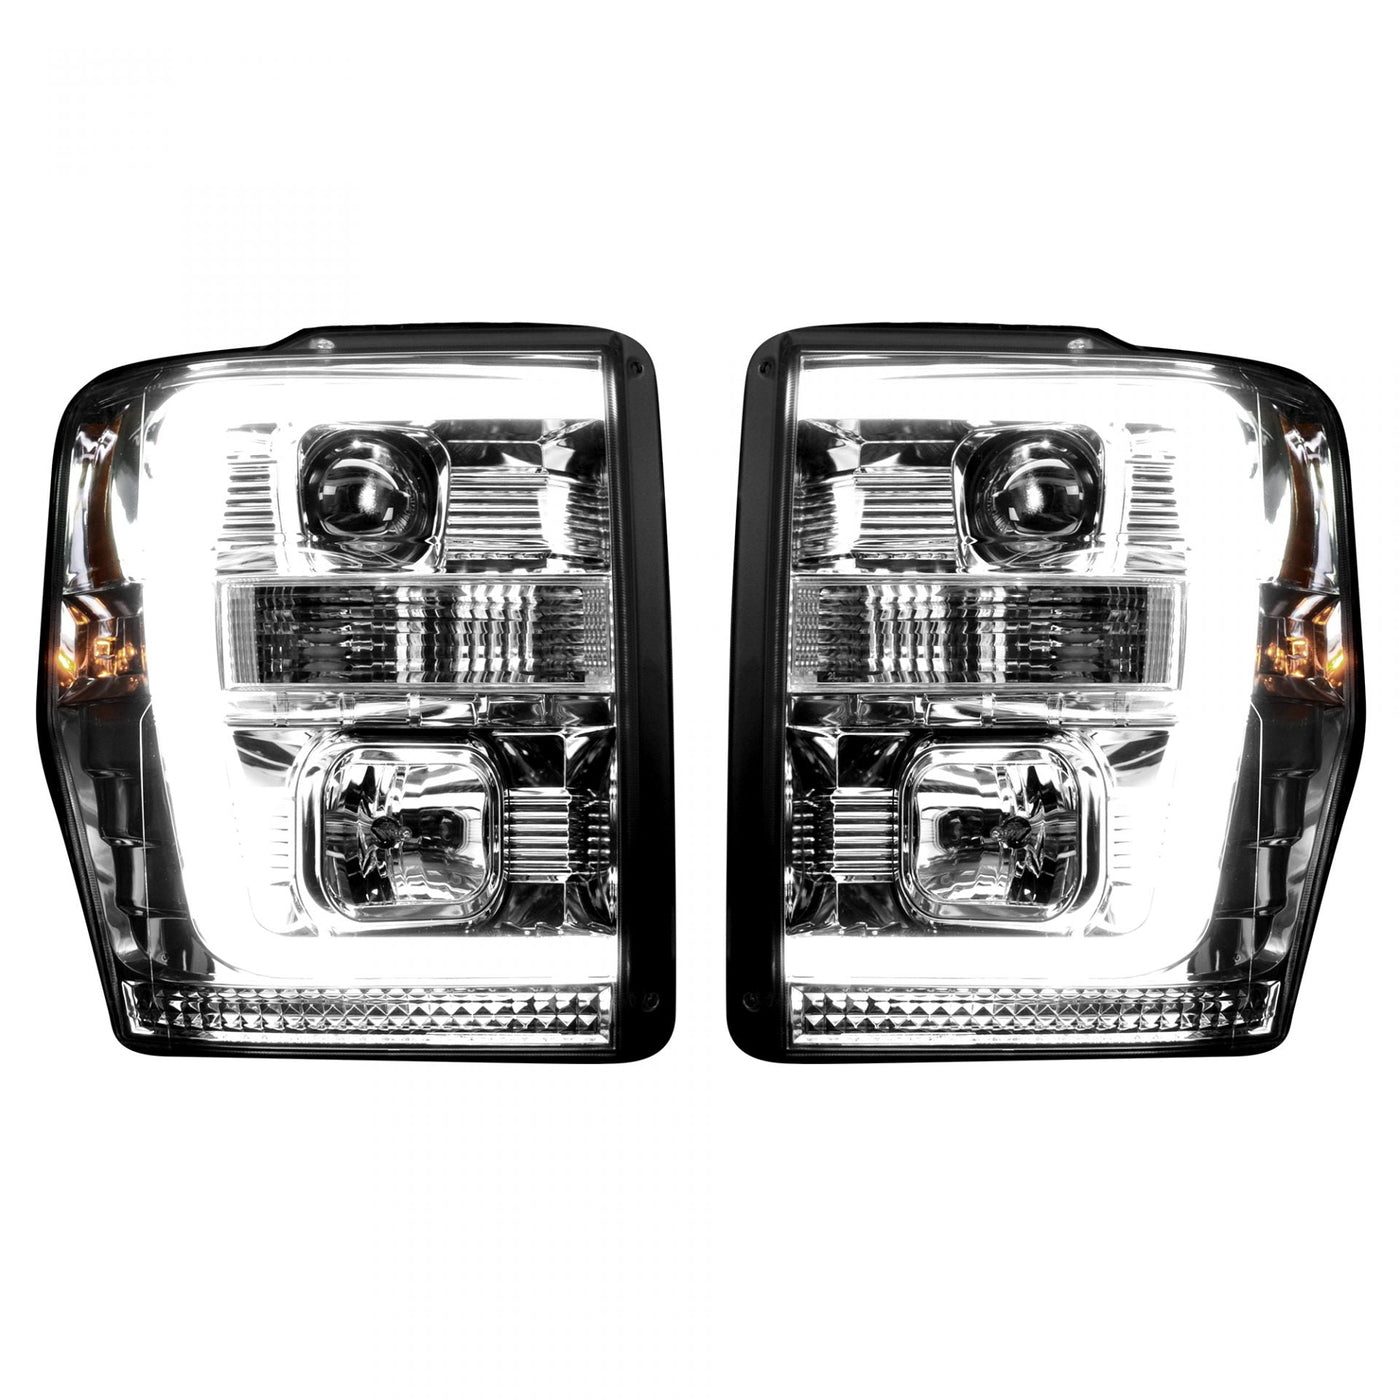 Ford Projector Headlights, Superduty Projector Headlights, Superduty 08-10 Projector Headlights, Clear/Chrome Headlights, Recon Projector Headlights